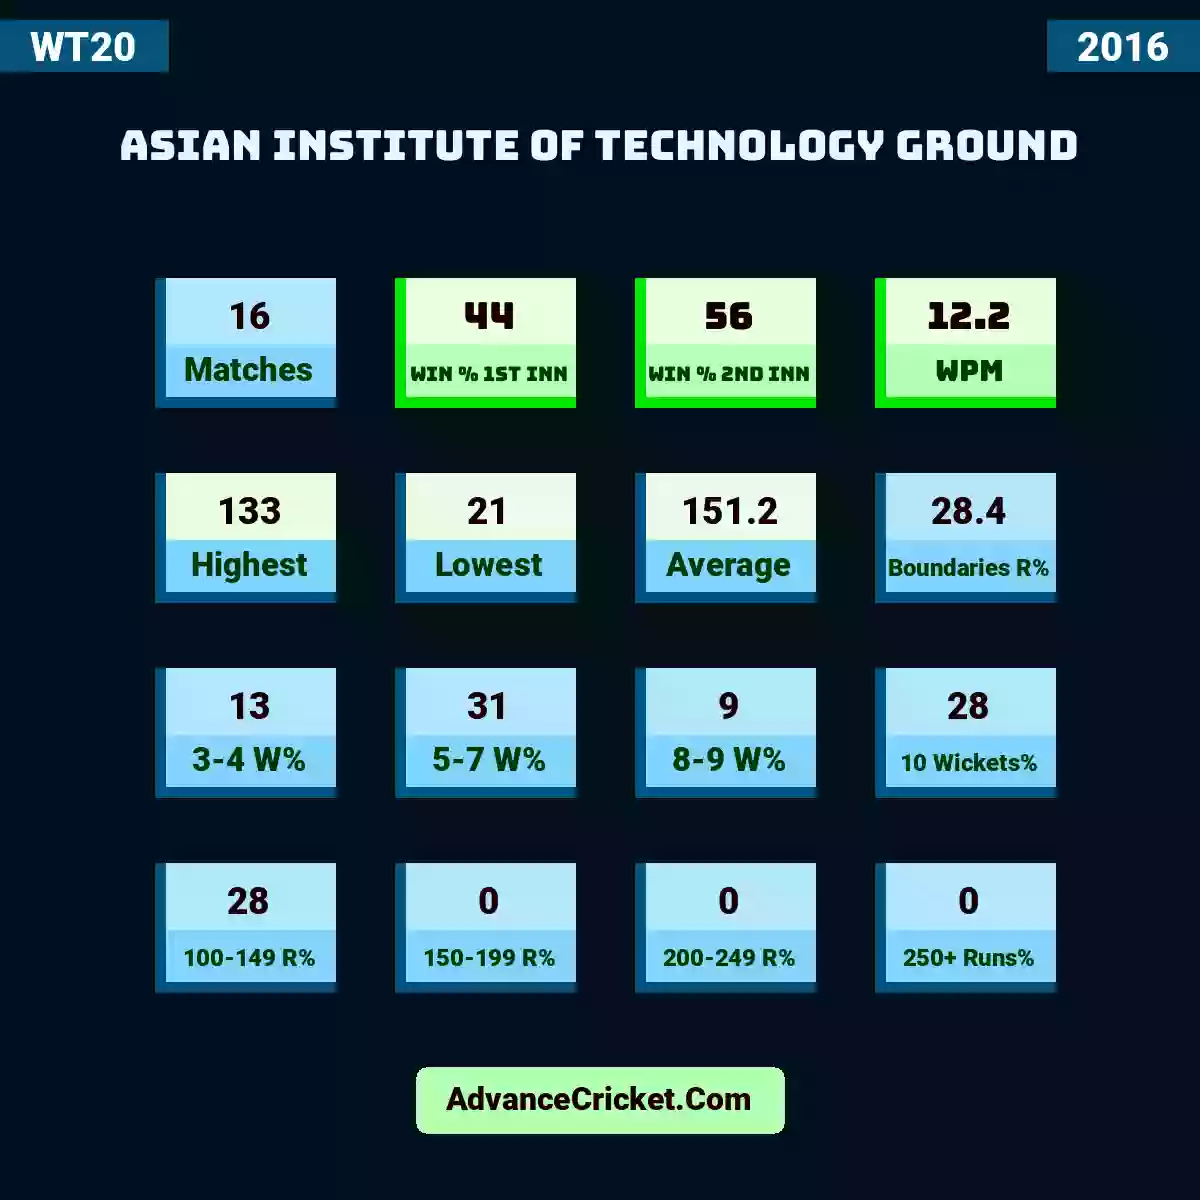 Image showing Asian Institute of Technology Ground with Matches: 16, Win % 1st Inn: 44, Win % 2nd Inn: 56, WPM: 12.2, Highest: 133, Lowest: 21, Average: 151.2, Boundaries R%: 28.4, 3-4 W%: 13, 5-7 W%: 31, 8-9 W%: 9, 10 Wickets%: 28, 100-149 R%: 28, 150-199 R%: 0, 200-249 R%: 0, 250+ Runs%: 0.